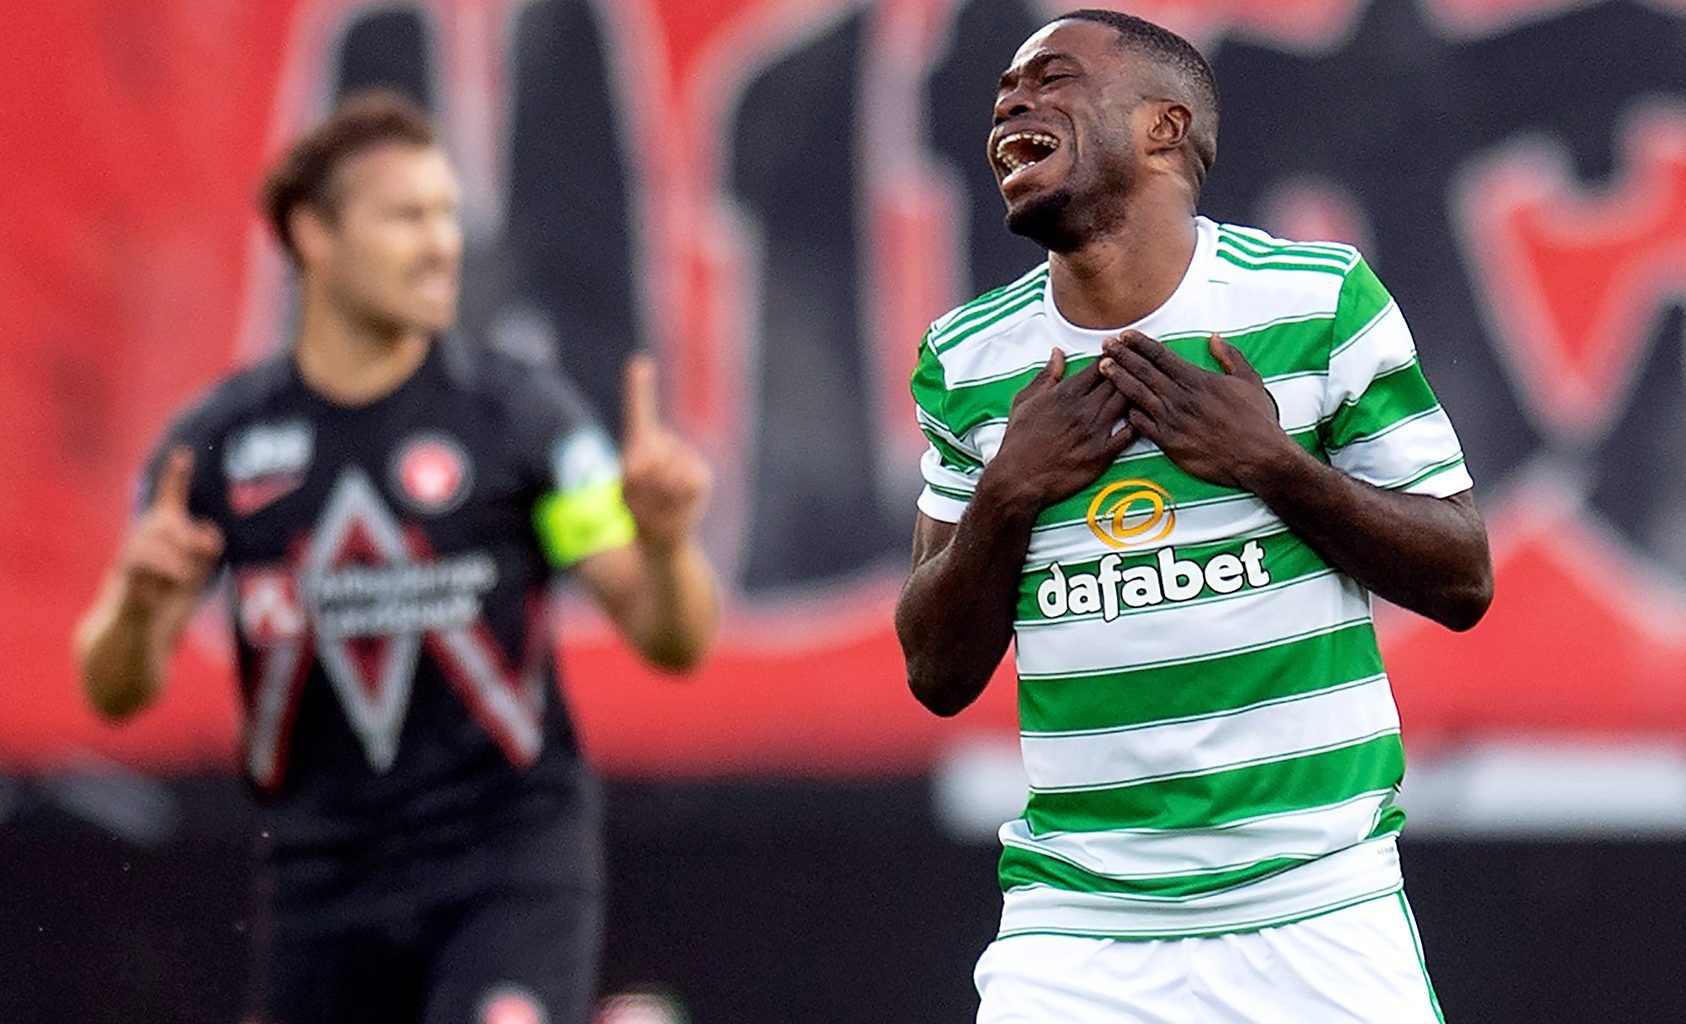 Soccer Football - Champions League - Second Qualifying Round - Second Leg - FC Midtjylland v Celtic - MCH Arena, Herning, Denmark - July 28, 2021 Celtic's Ismaila Soro reacts Bo Amstrup/Ritzau Scanpix via REUTERS      ATTENTION EDITORS - THIS IMAGE WAS PROVIDED BY A THIRD PARTY. DENMARK OUT. NO COMMERCIAL OR EDITORIAL SALES IN DENMARK.